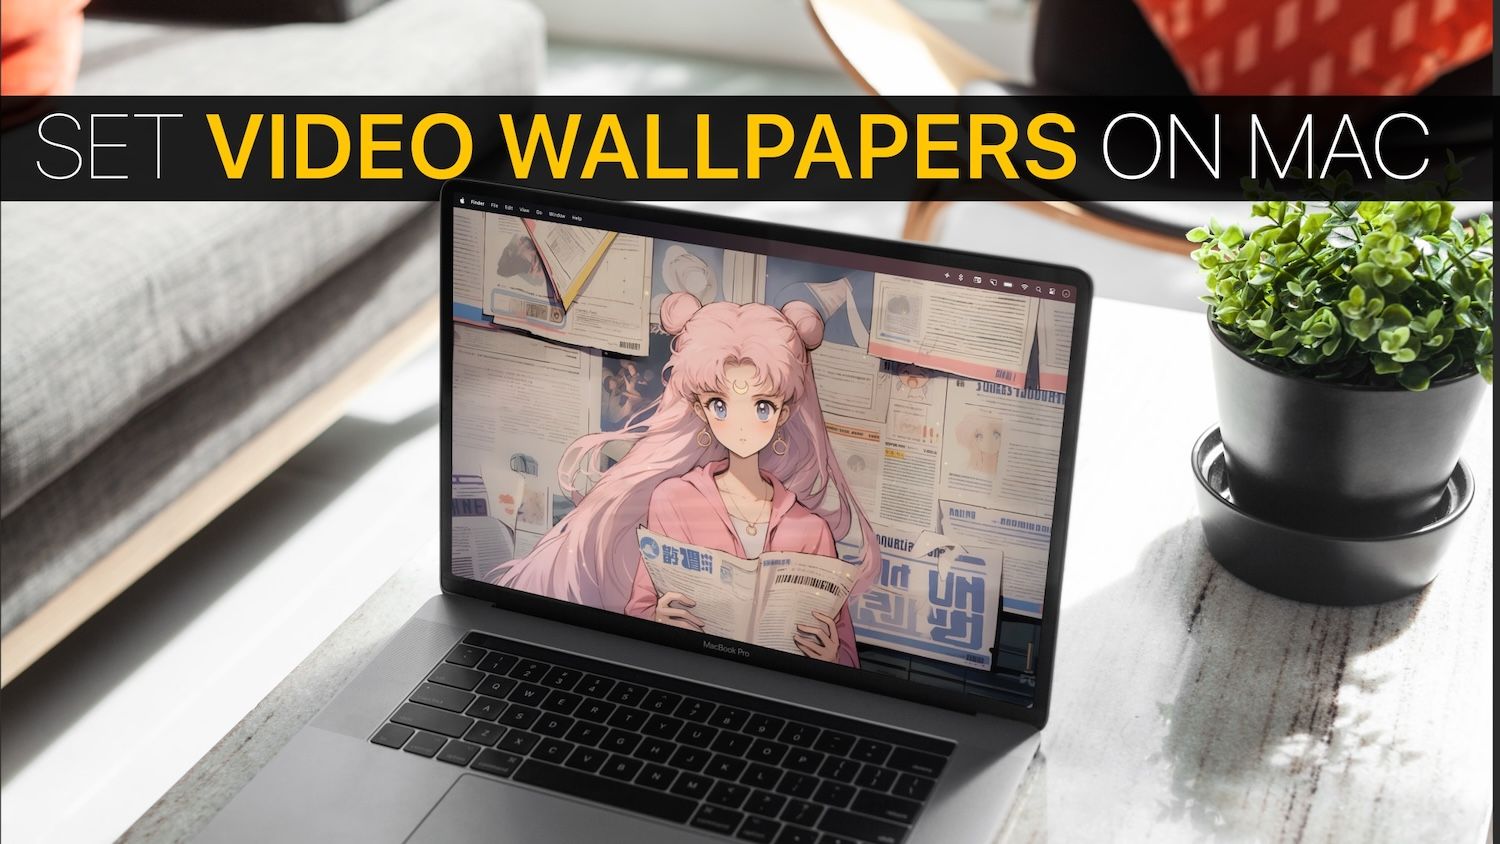 How to Set Live Video Wallpapers on Mac